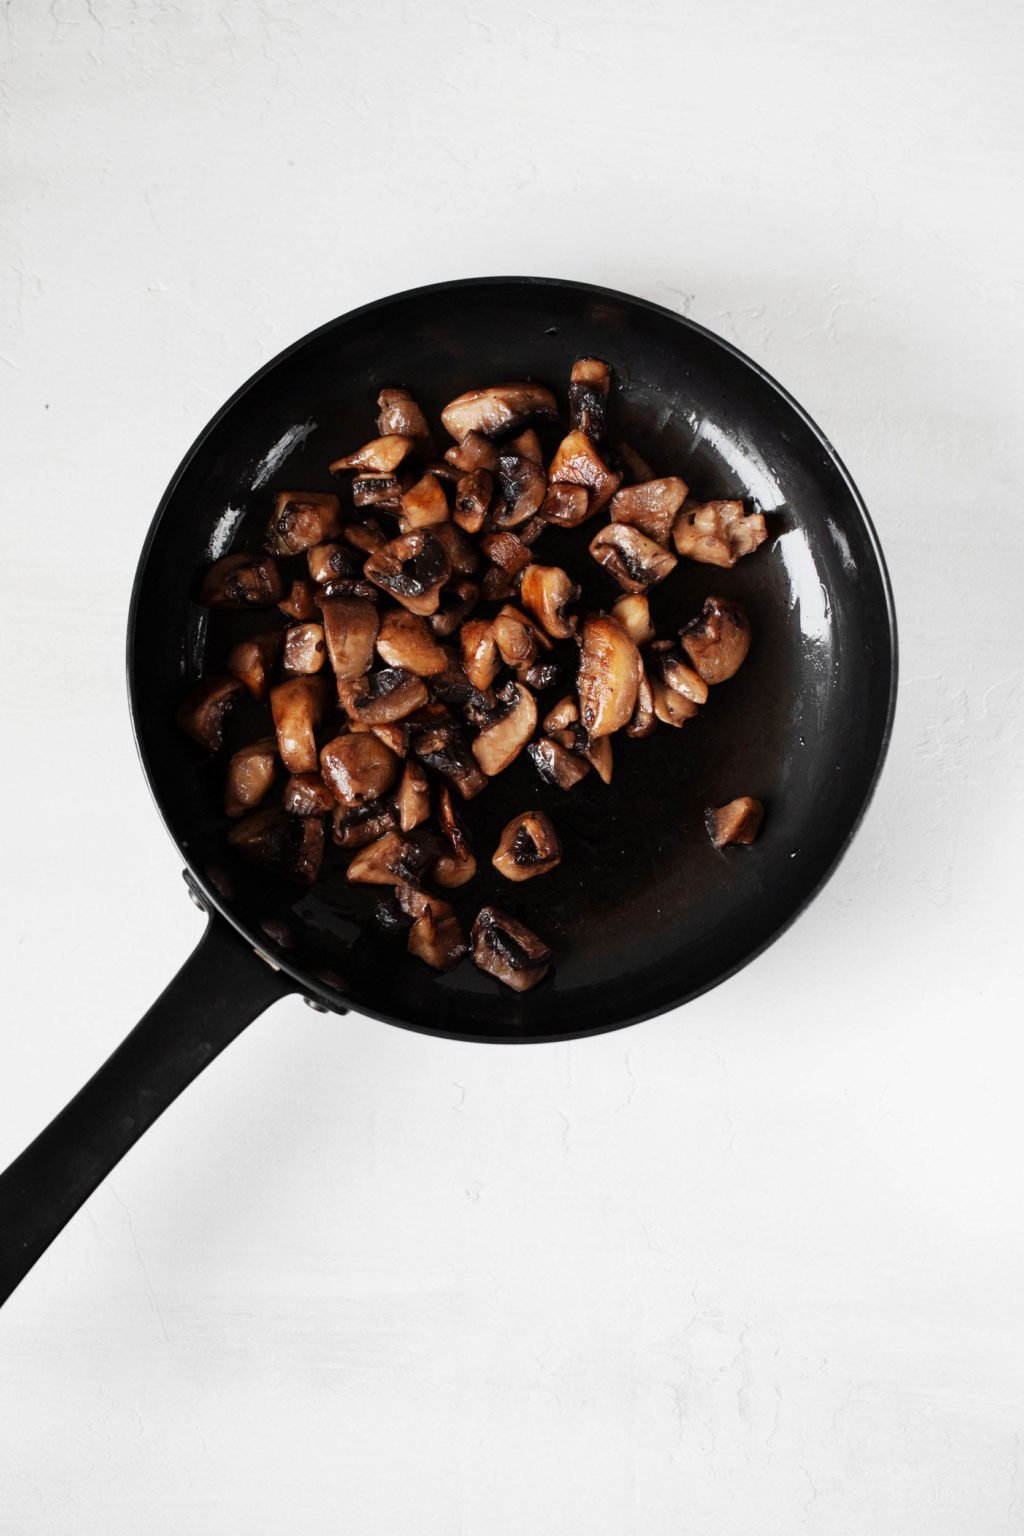 Sauteed mushrooms are pictured in a small, black frying pan. The pan rests on a white surface.